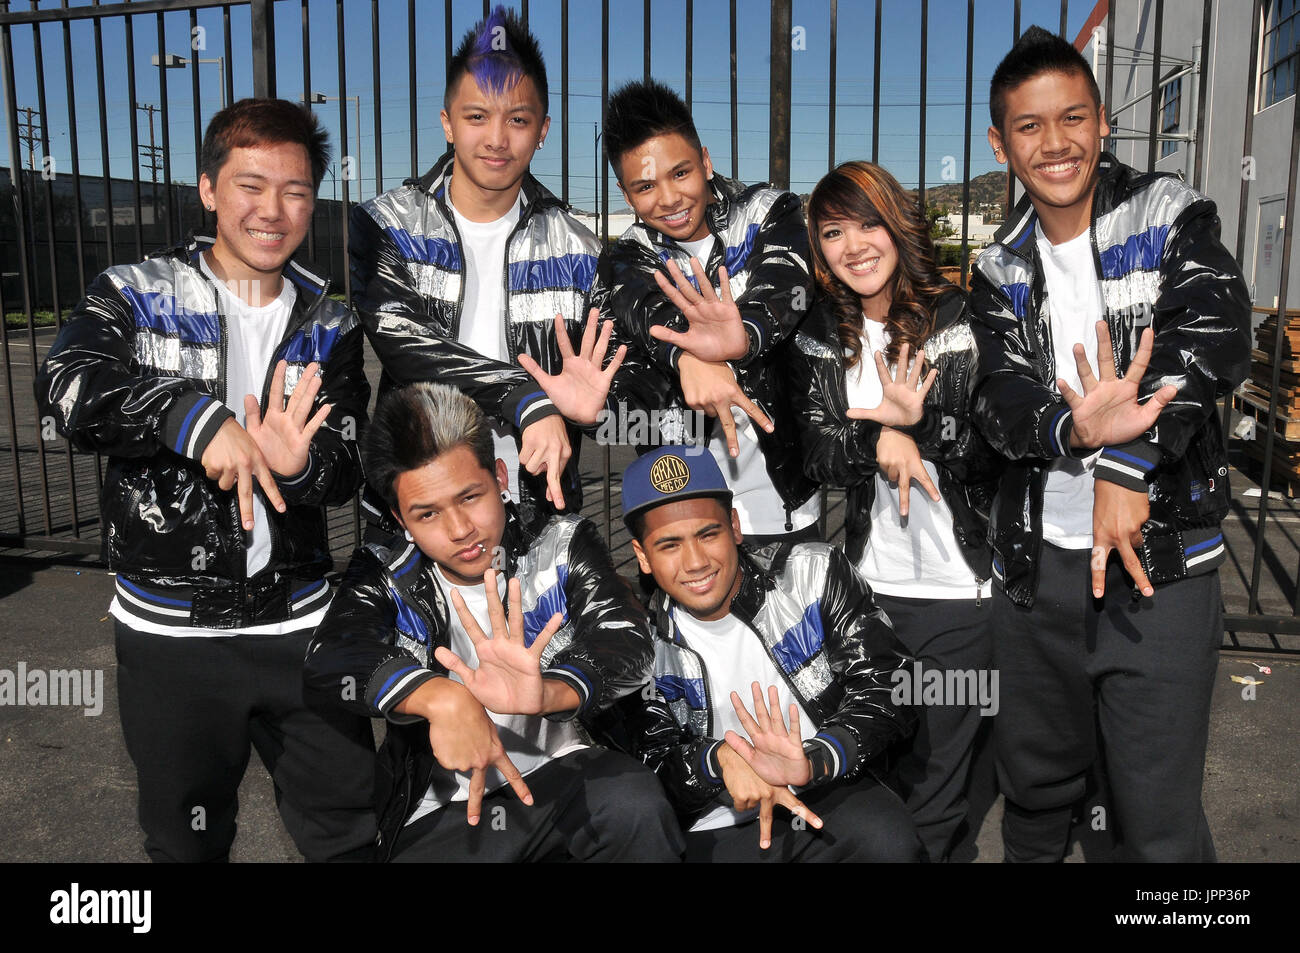 Black Canvas from Hawaii at Randy Jackson's America's Best Dance Crew Season 7 Season Of The Superstars - Los Angeles Auditions at Center Staging in Burbank, CA. The event took place on Saturday, January 28, 2012. Photo by Sthanlee B. Mirador Pacific Rim Photo Press. Stock Photo